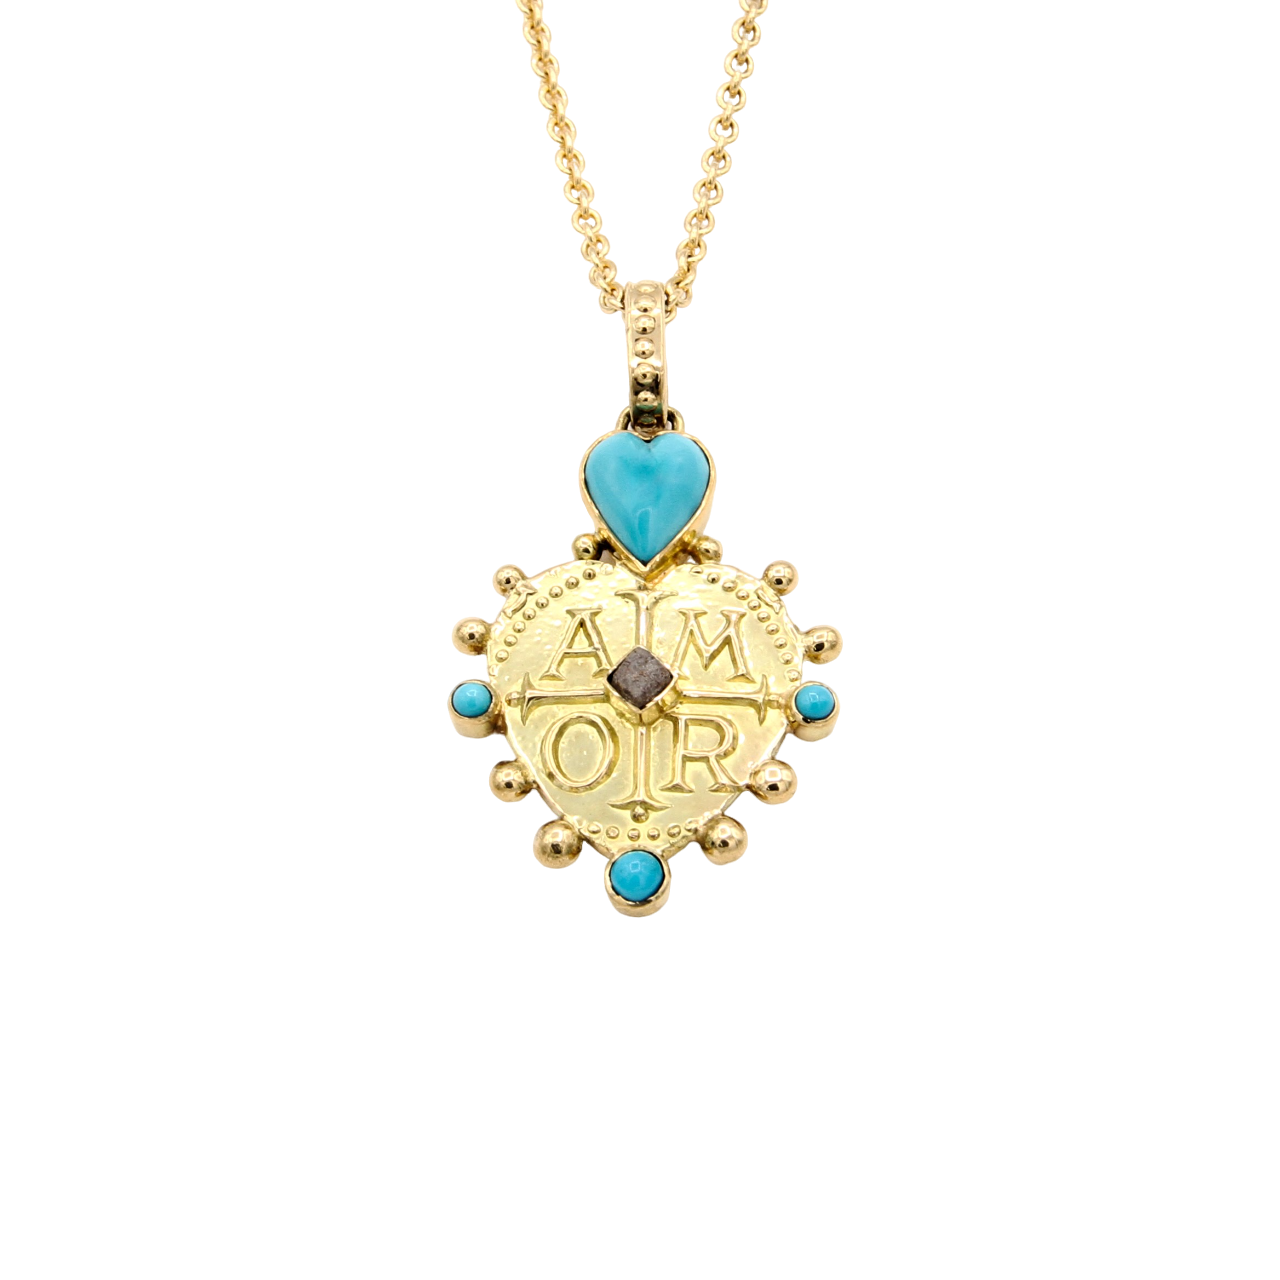 Dali Amour Sun Heart Pendant with McNulty Turquoise-Jewelry-Doug Magnus-Sorrel Sky Gallery